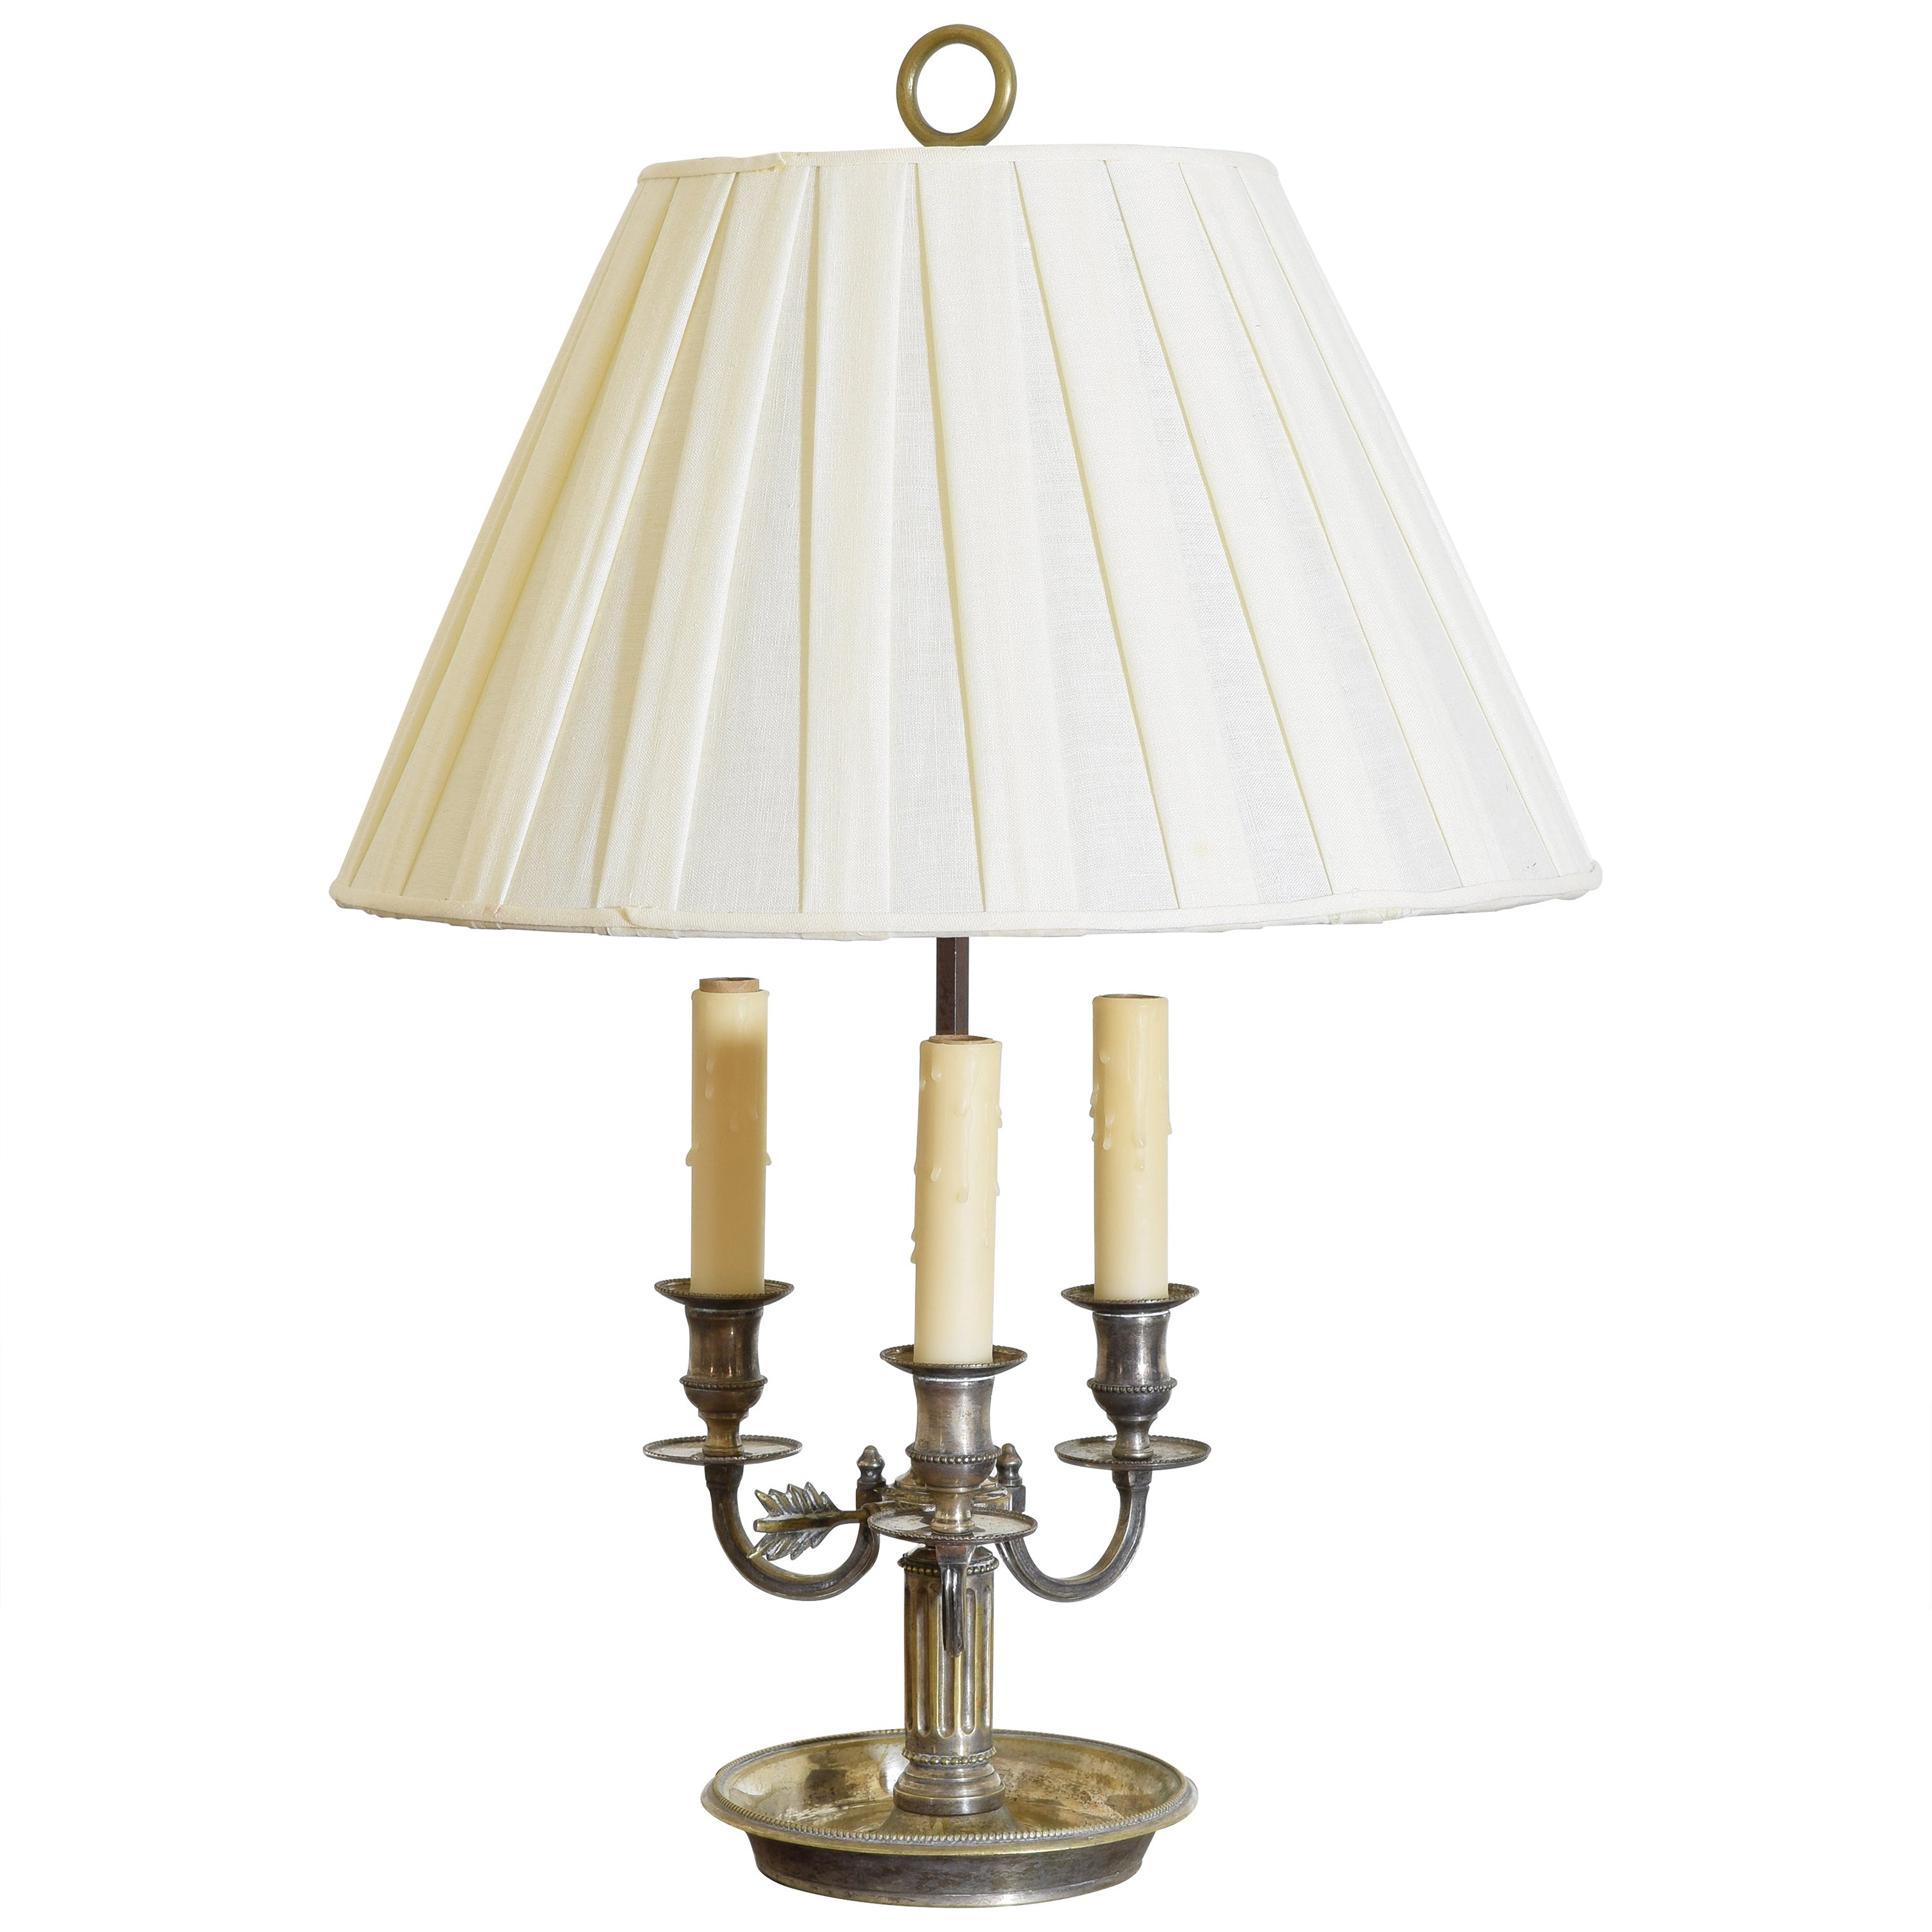 French Neoclassic Silver Plate 3-Light Bouillotte Lamp, 18th/19th cen. For Sale